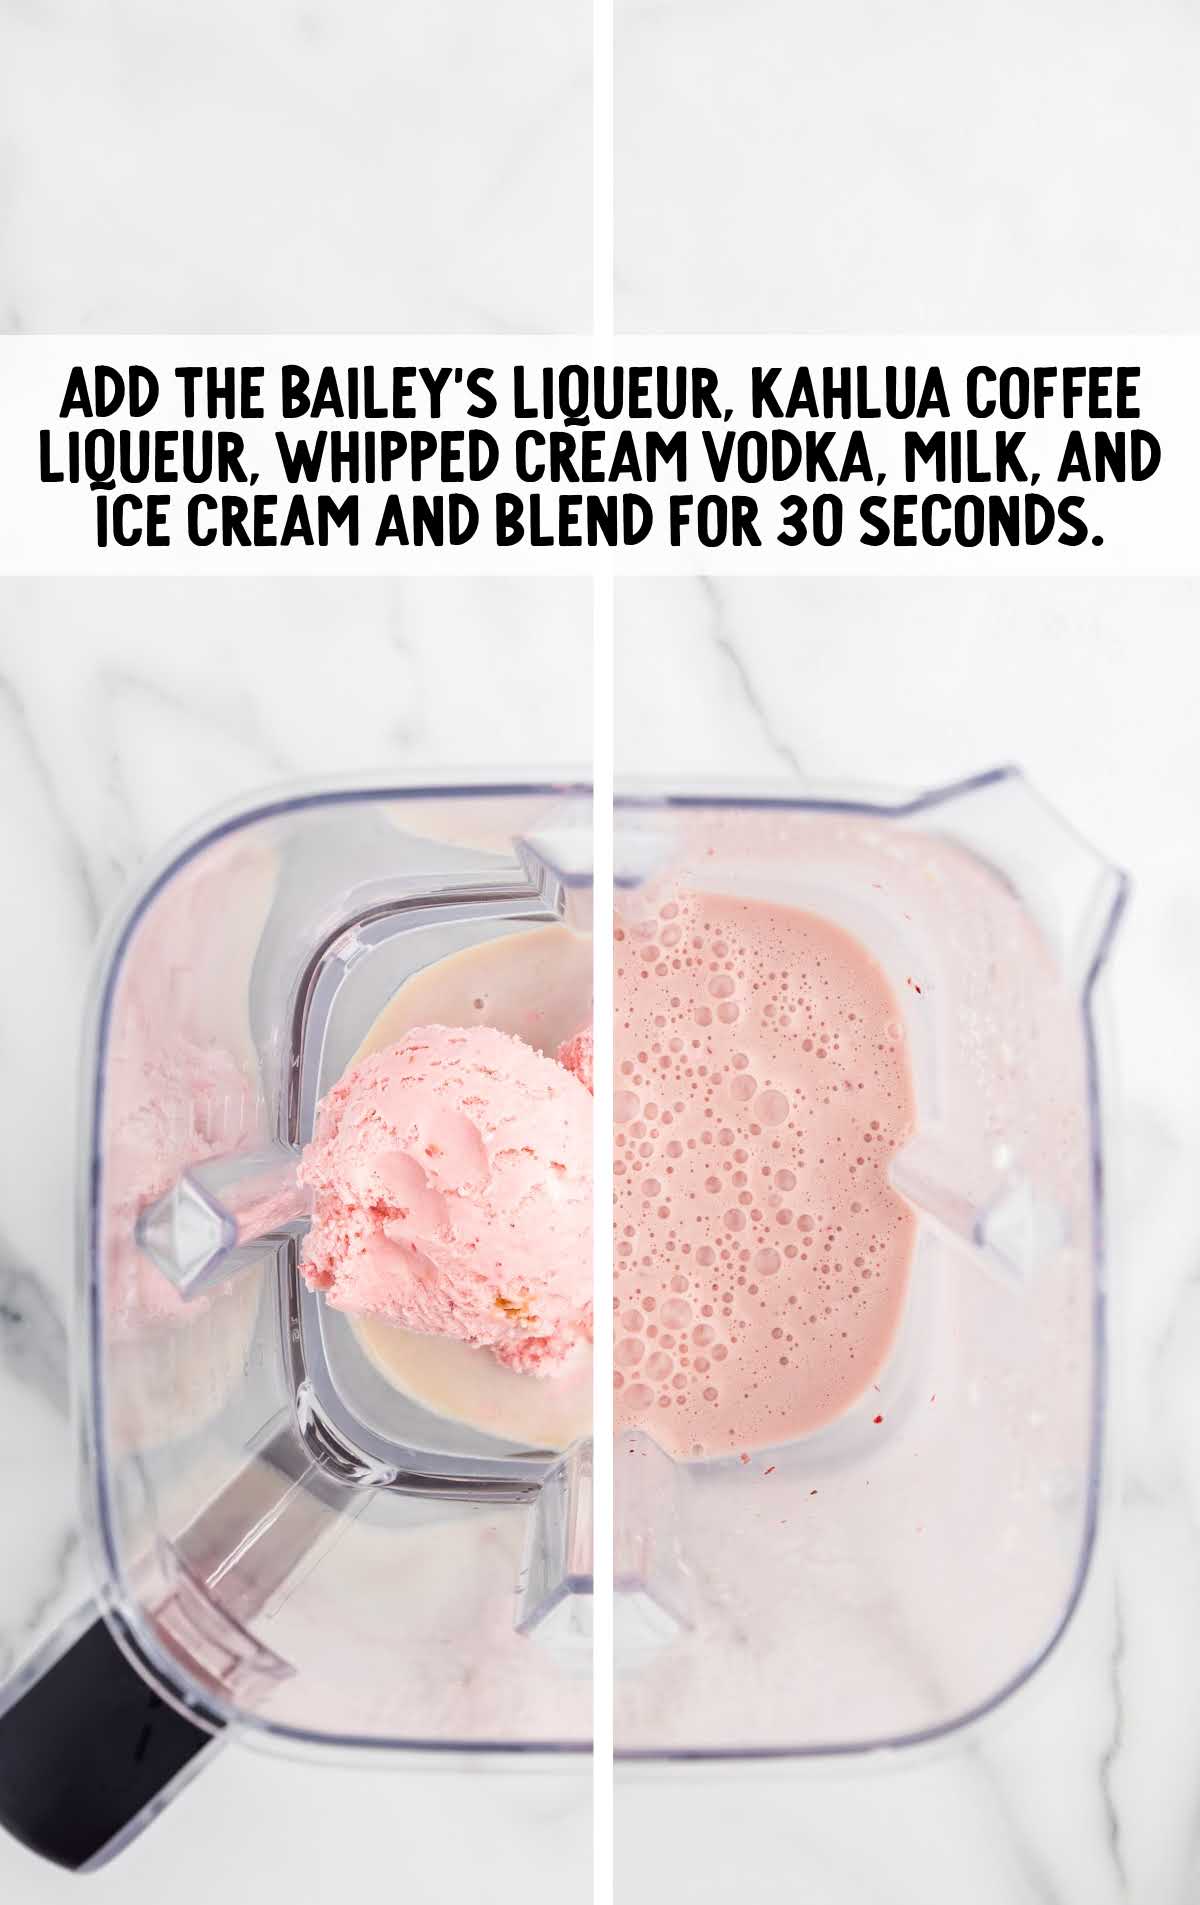 Bailey’s strawberries & cream liqueur, Kahlua coffee liqueur, whipped cream vodka, whole milk, and strawberry ice cream added to a blender